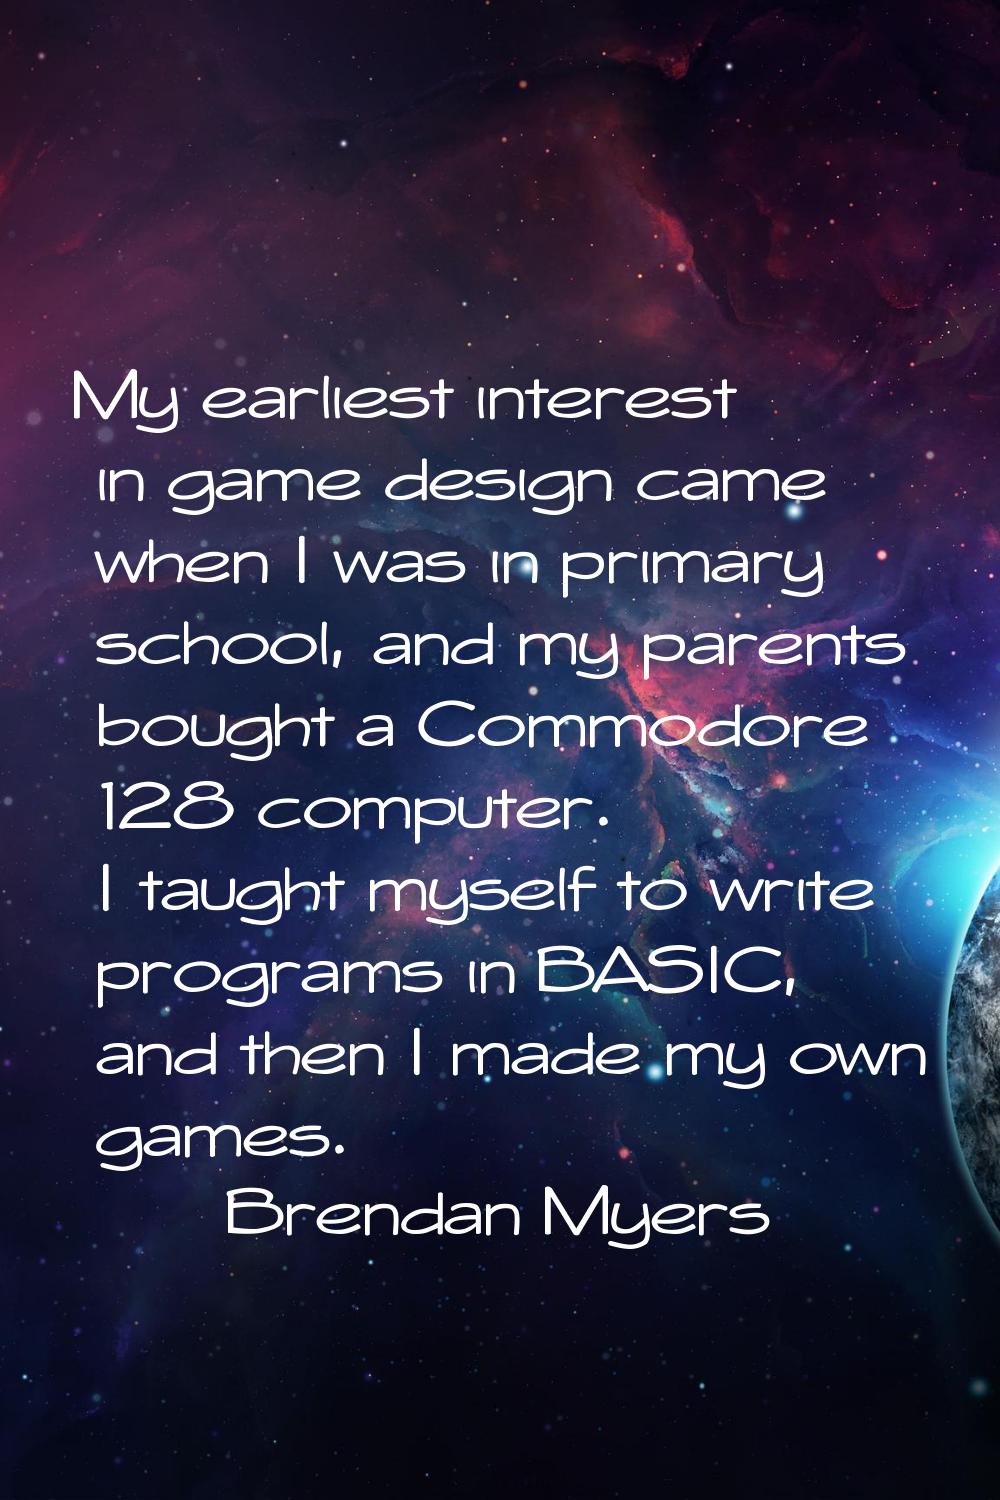 My earliest interest in game design came when I was in primary school, and my parents bought a Comm